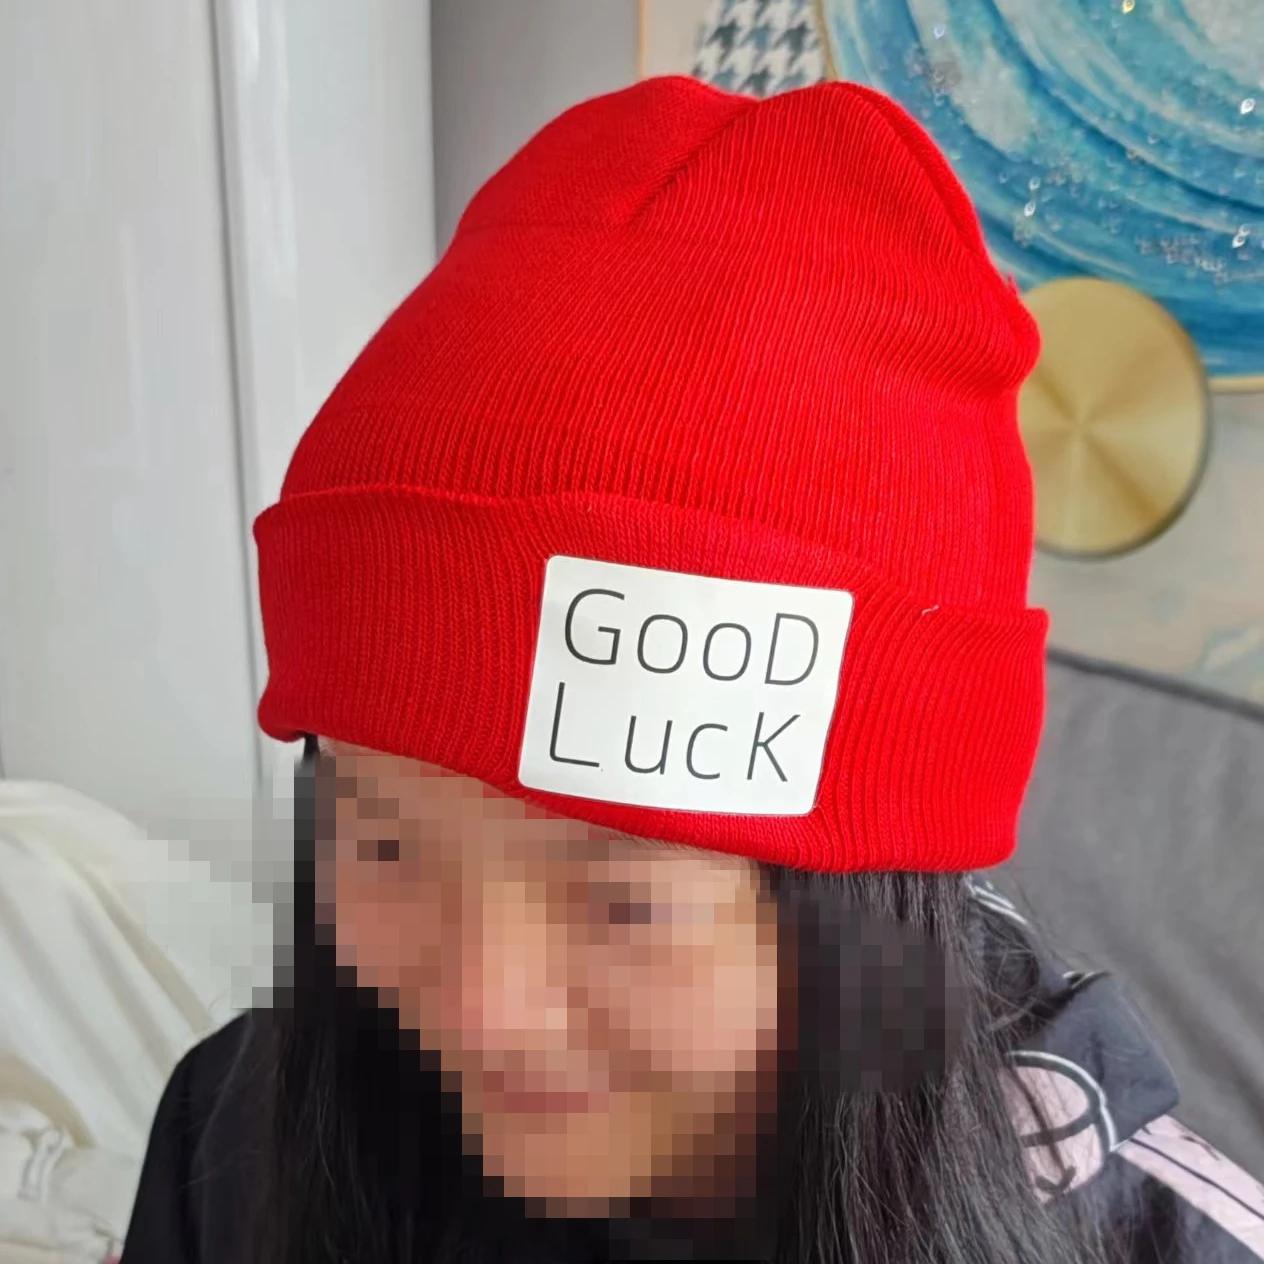 Undead Unluck Anime Cosplay Red Hat Good Luck Words Printing hat